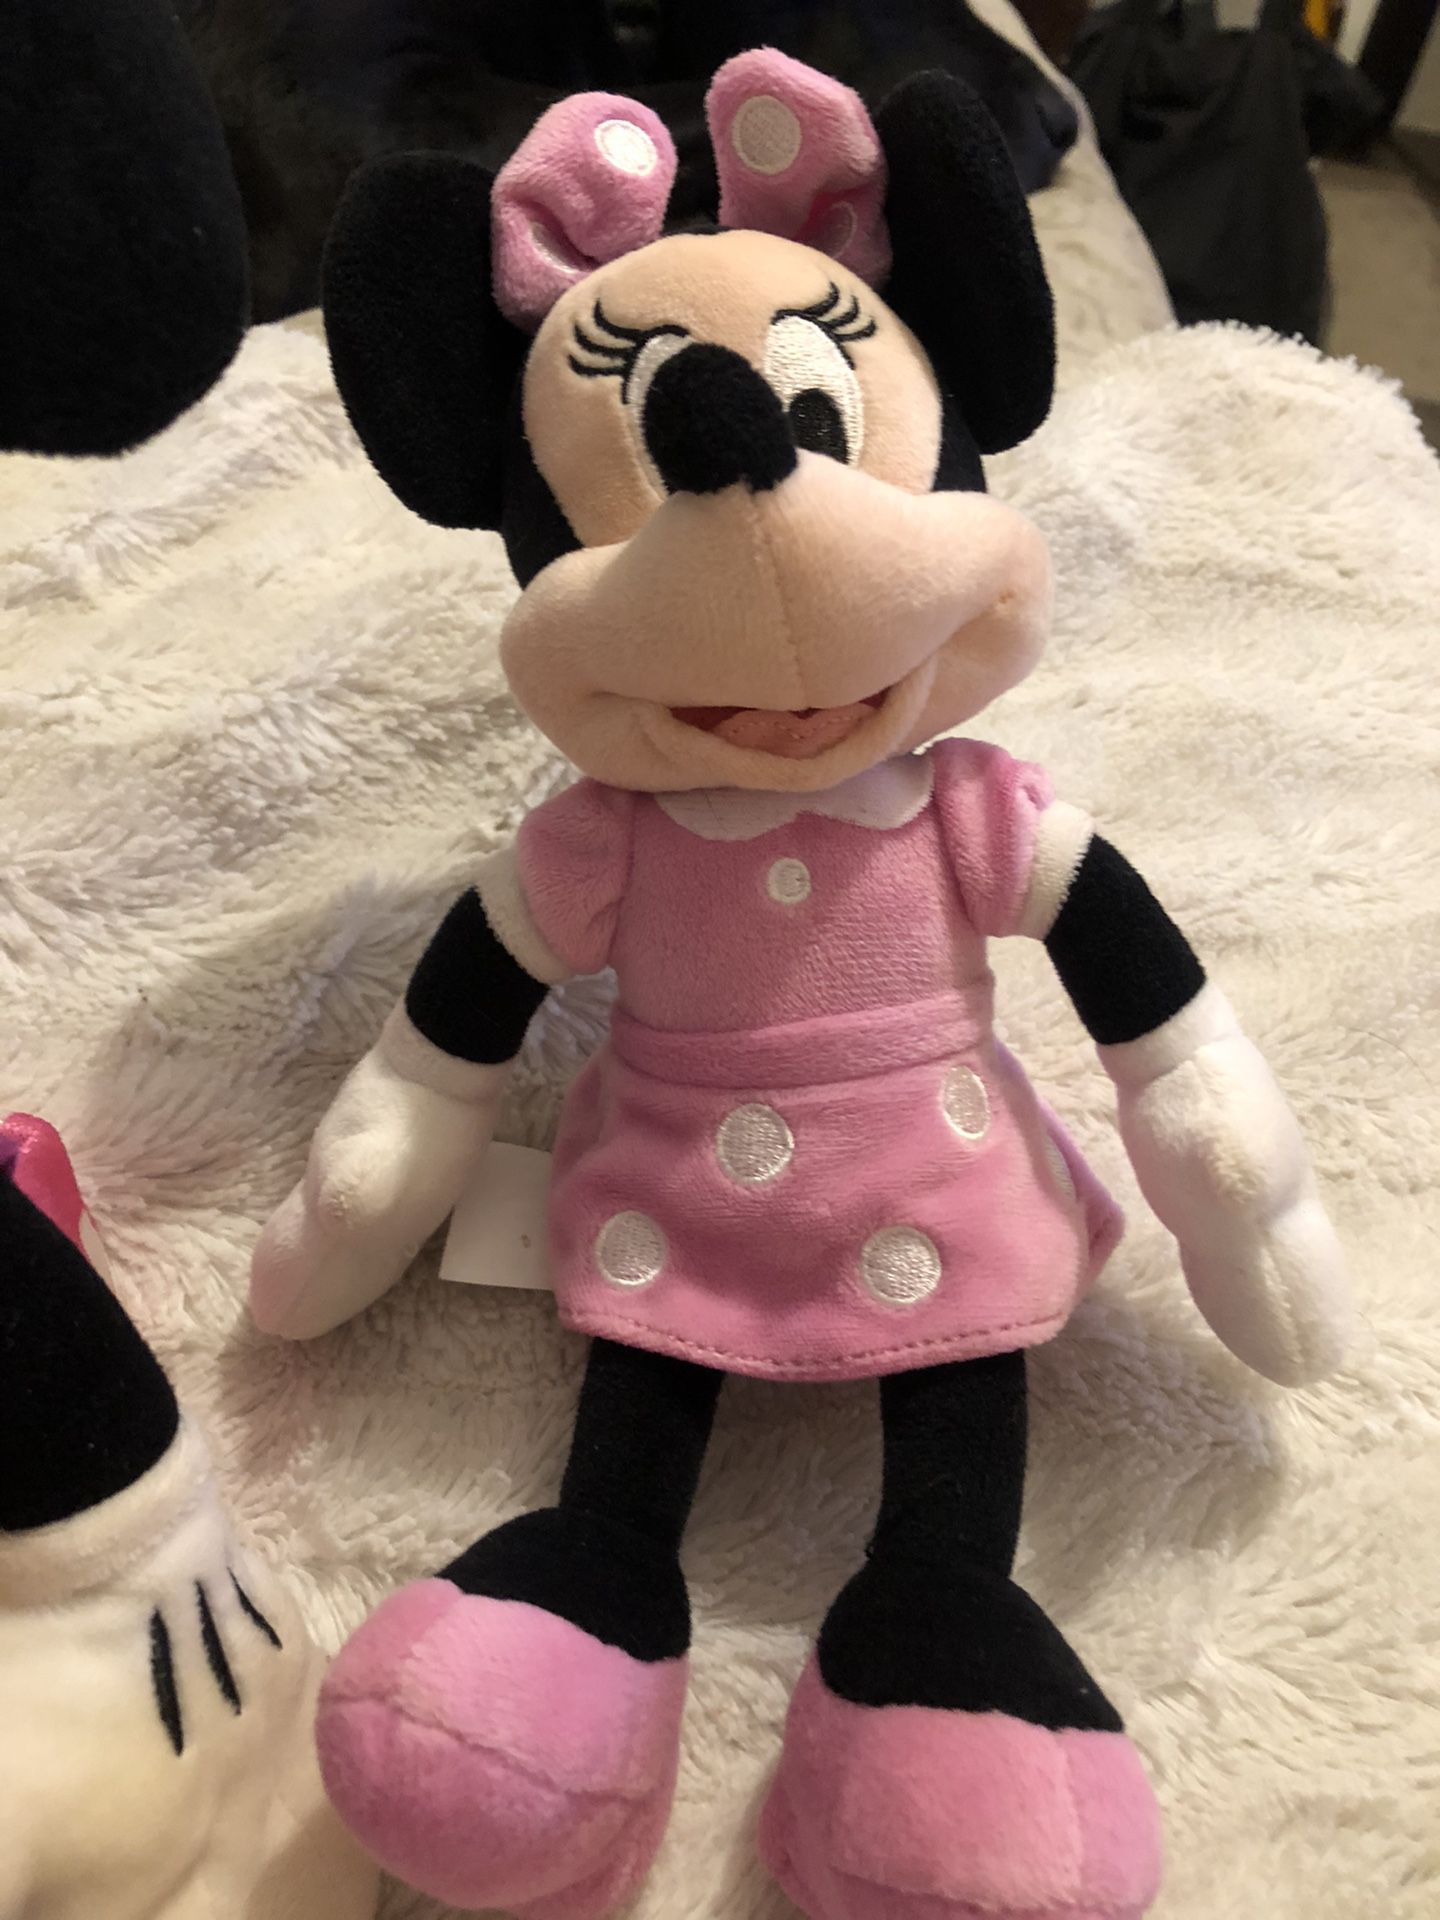 A Little Girl’s Minnie Mouse Bicycle Helmet And 2 Matching Mini Mouse Disney Stuffed Toys